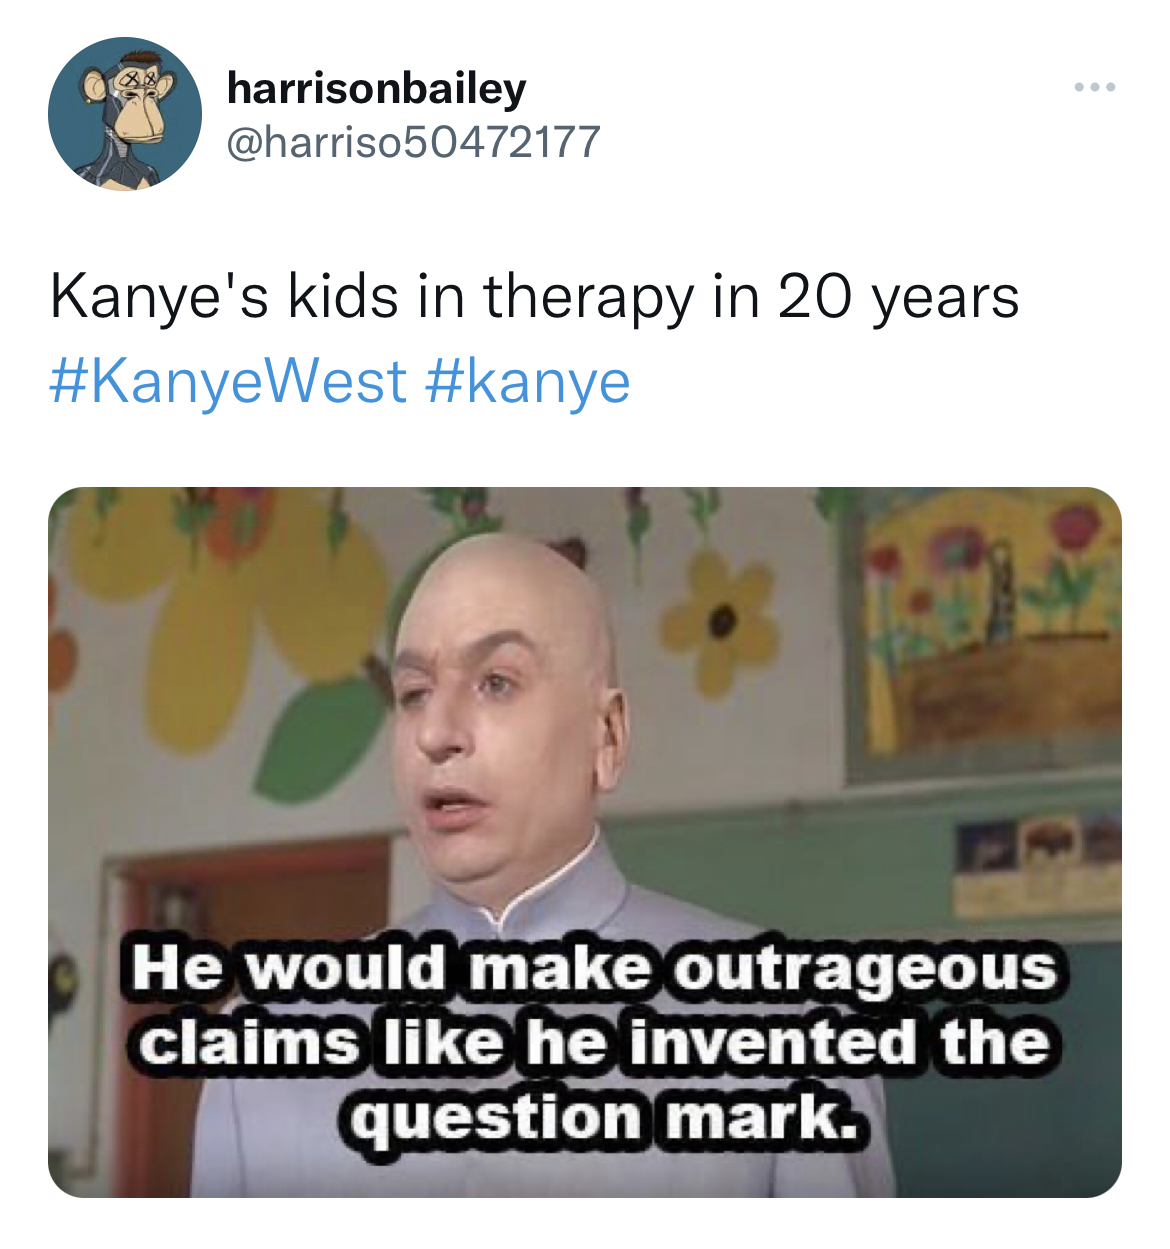 tweets roasting celebs - pods - harrisonbailey Kanye's kids in therapy in 20 years He would make outrageous claims he invented the question mark. www